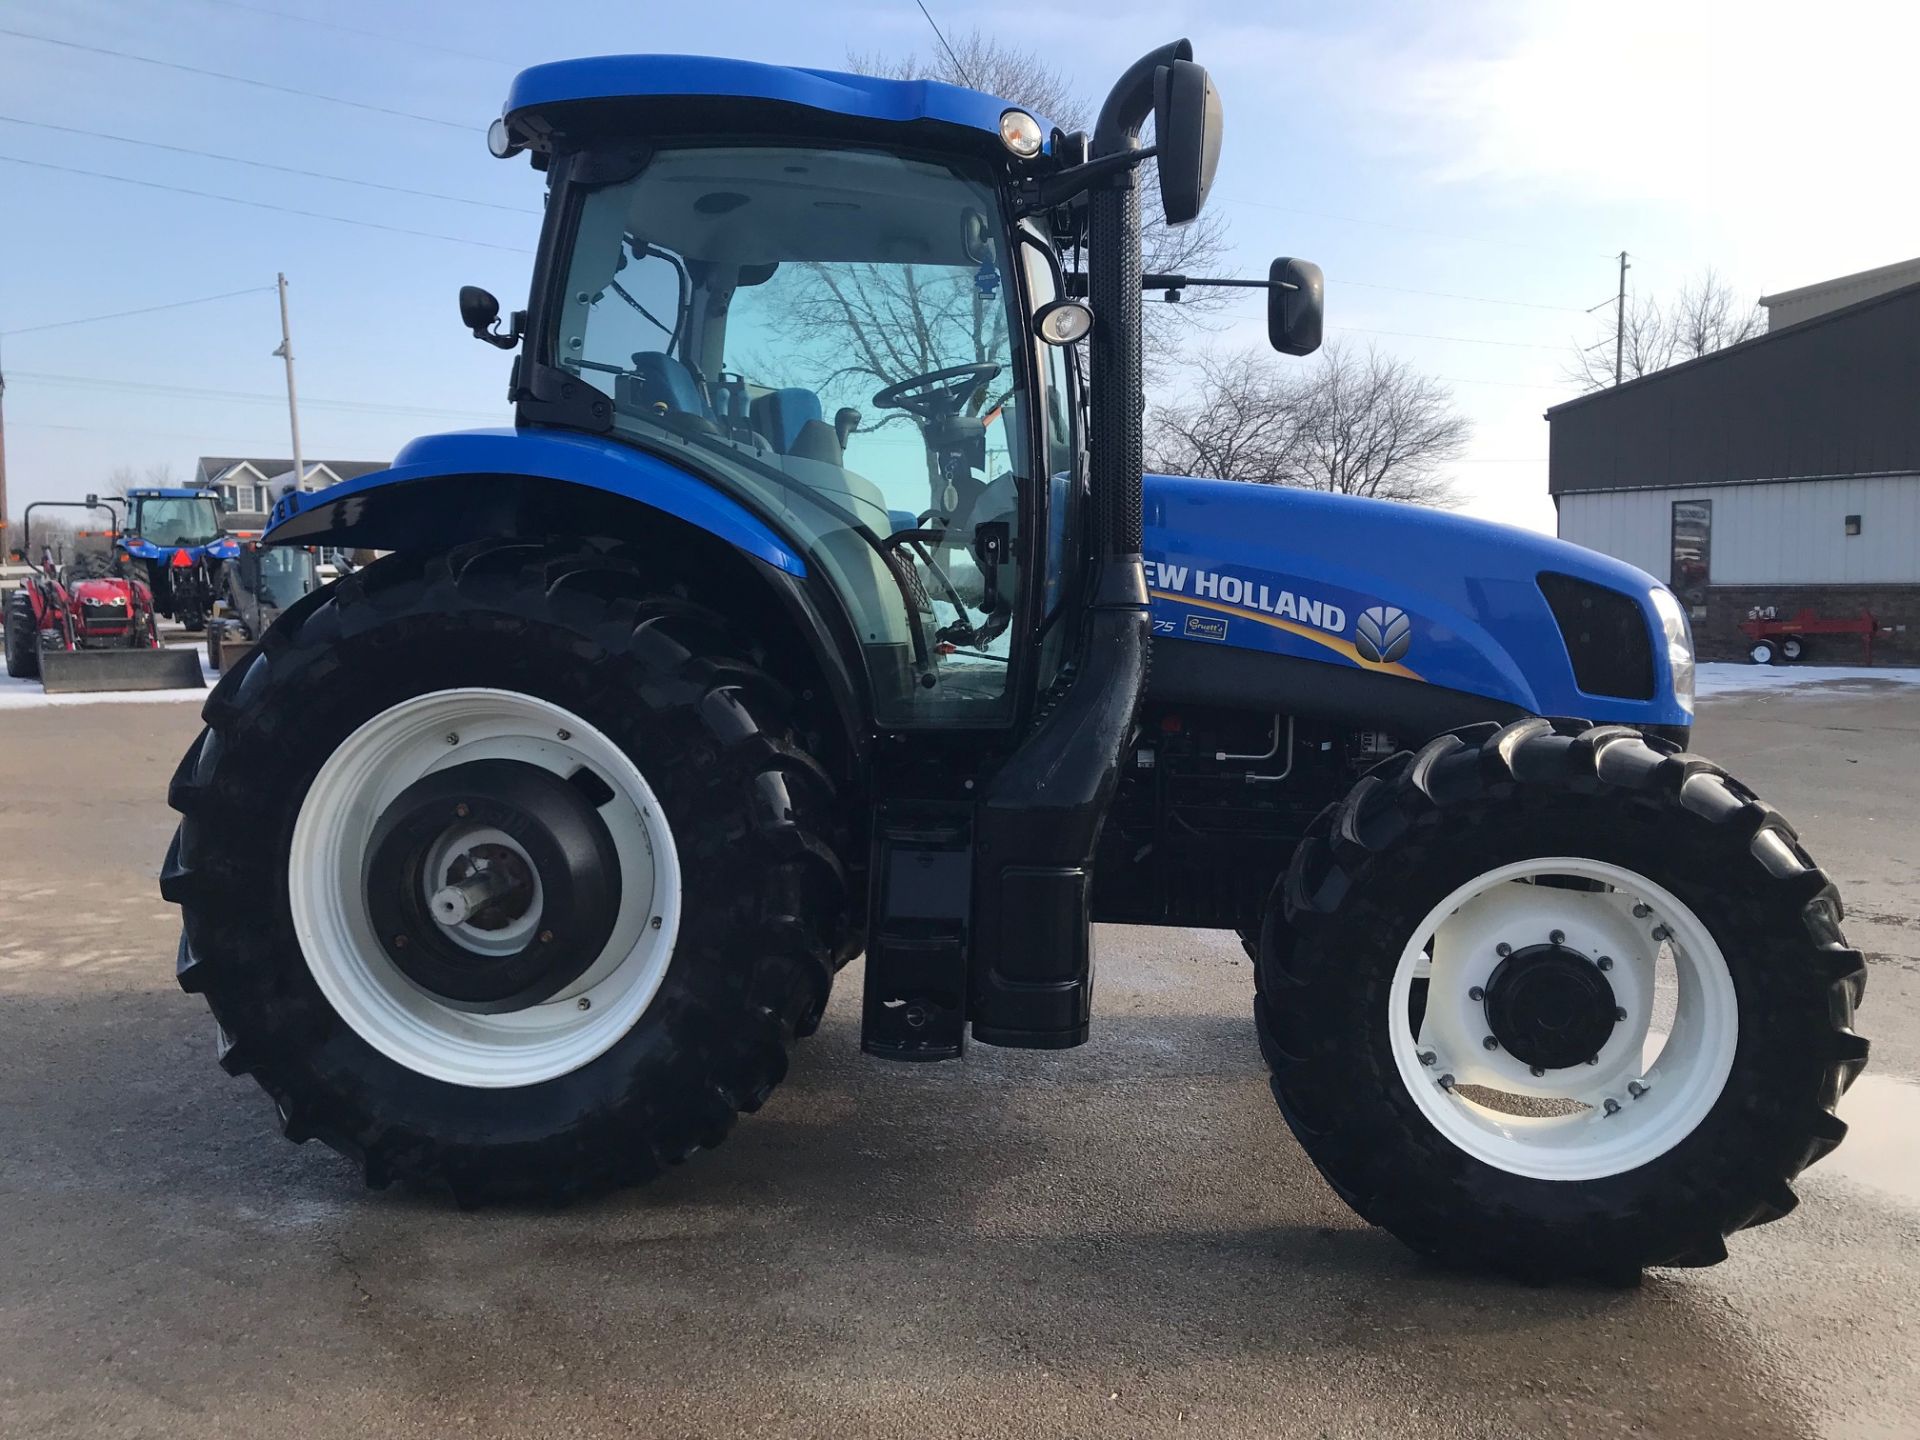 '14 New Holland T6.175 MFWD Tractor, SN ZEBD01738 - Image 5 of 7